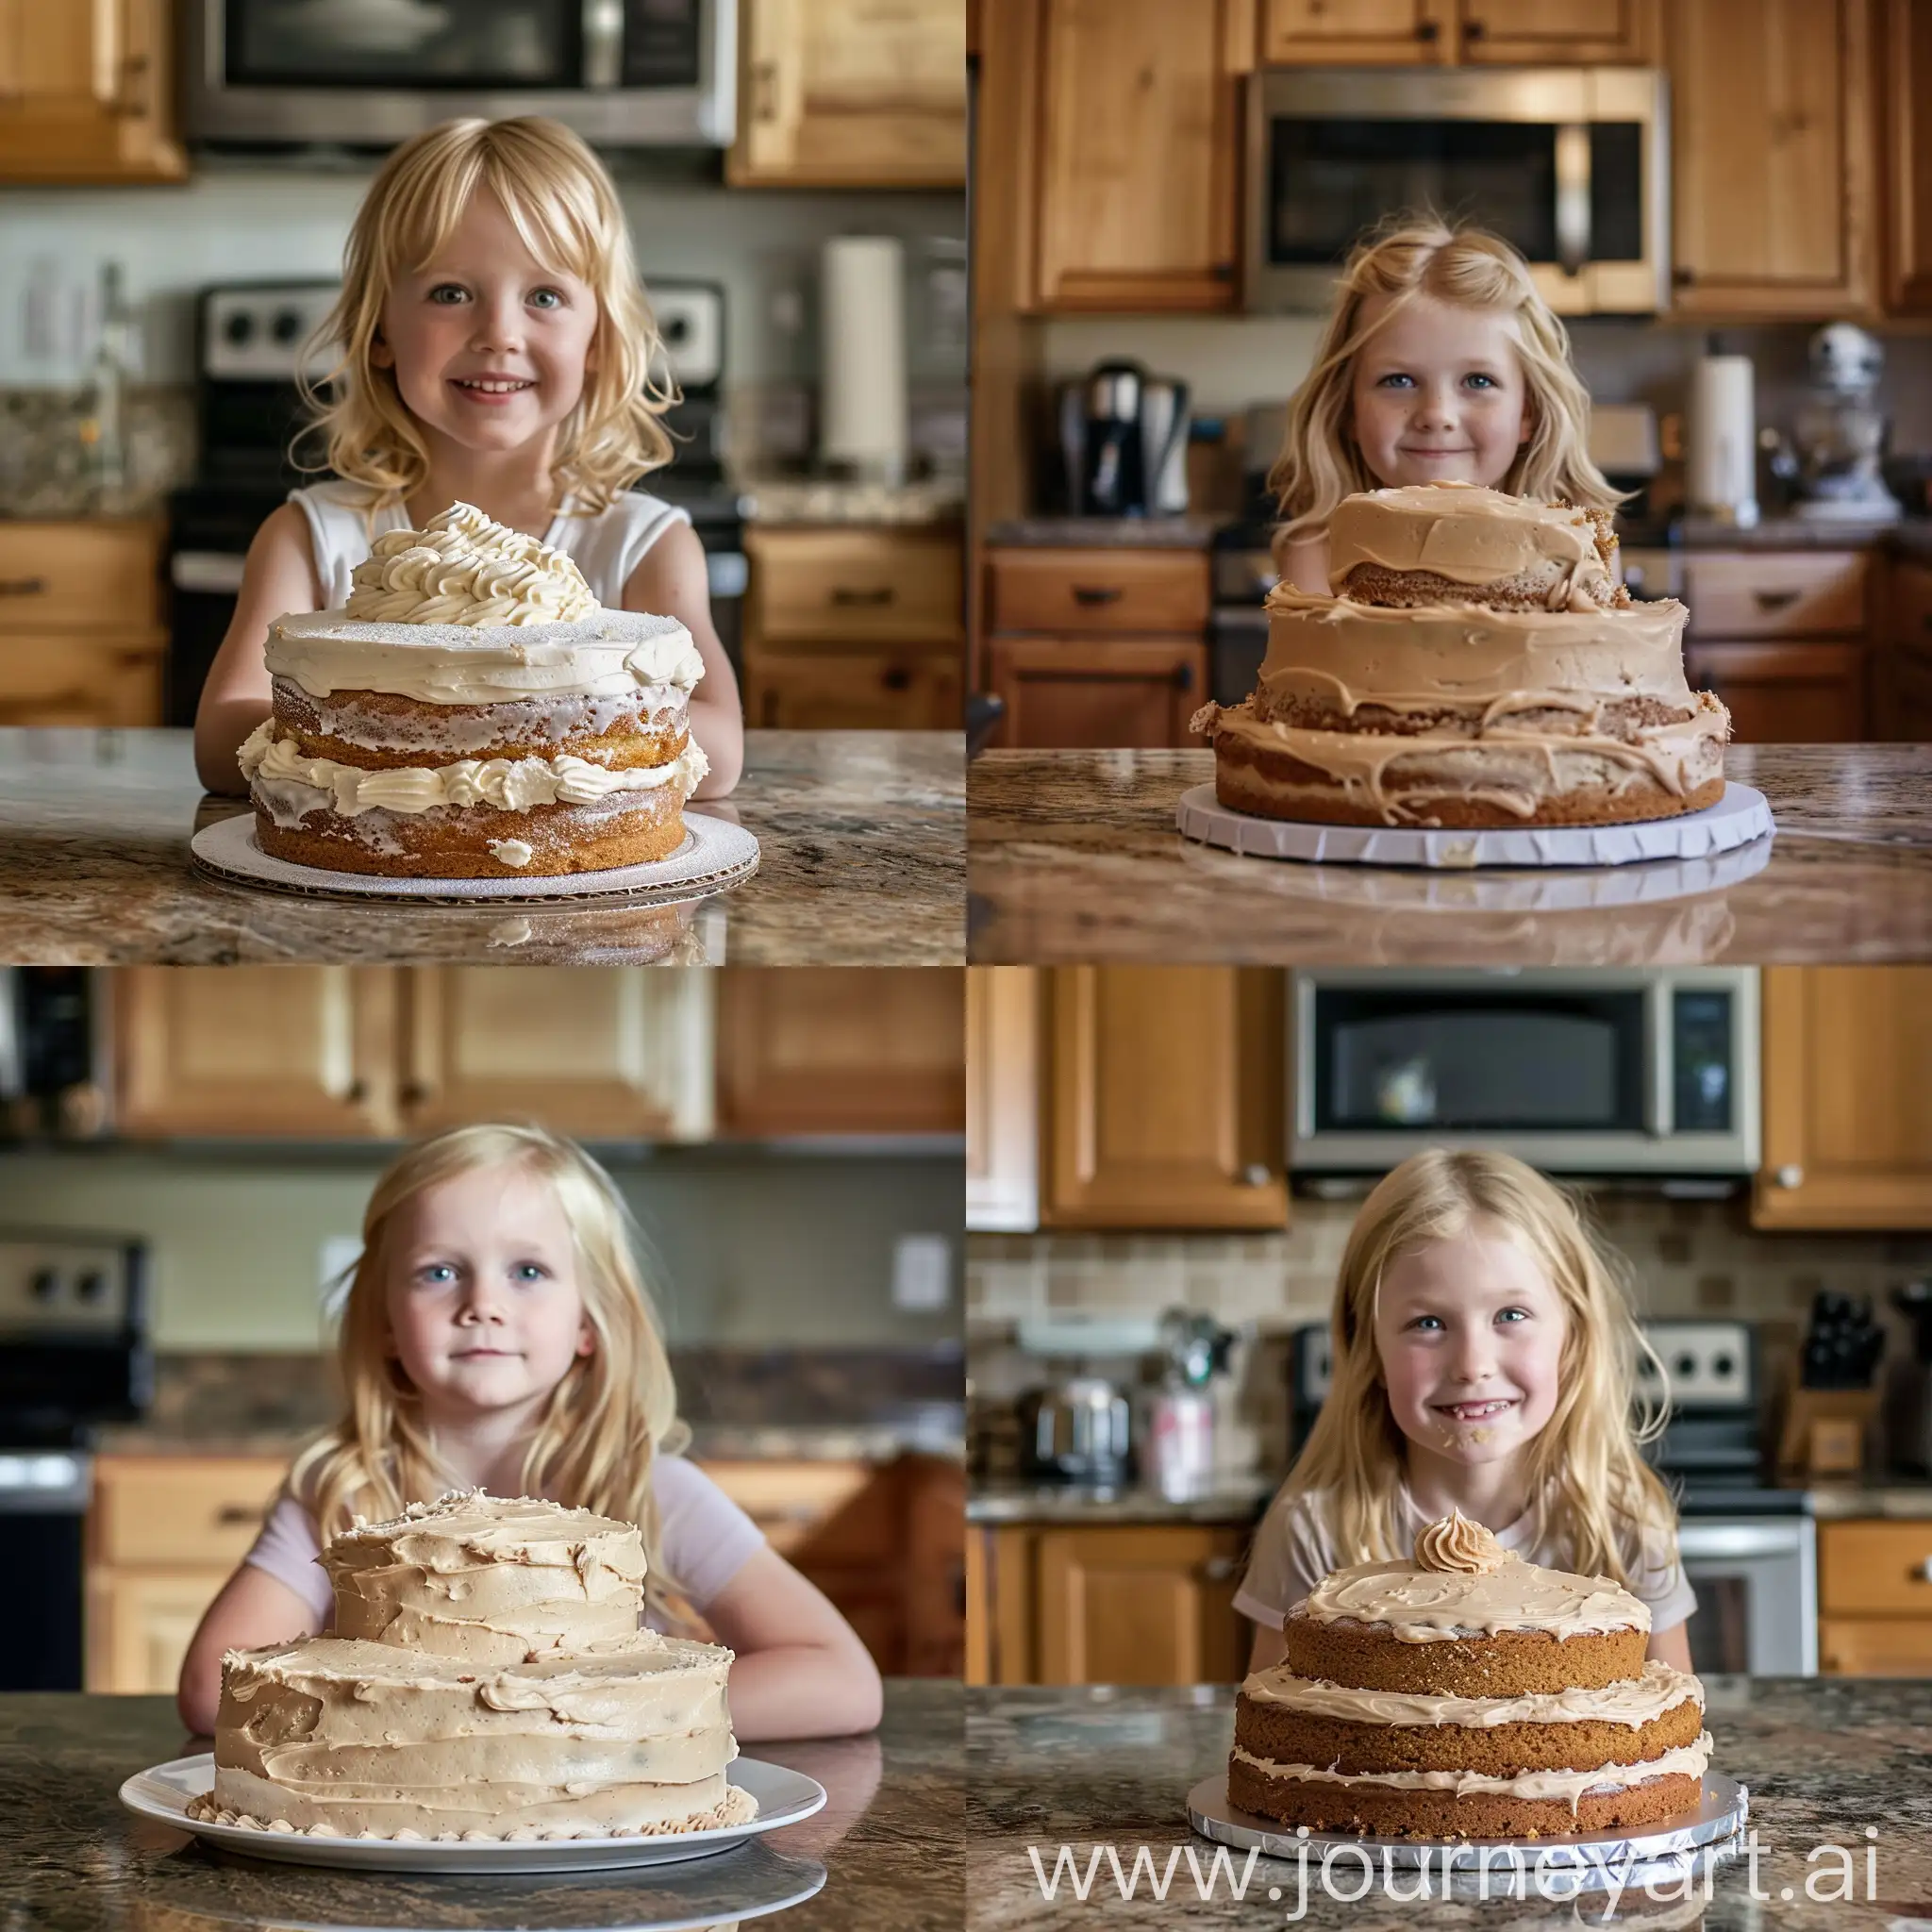 photograph of a 7-year old blonde girl sitting behind a two layered cake with frosting on it in a kitchen